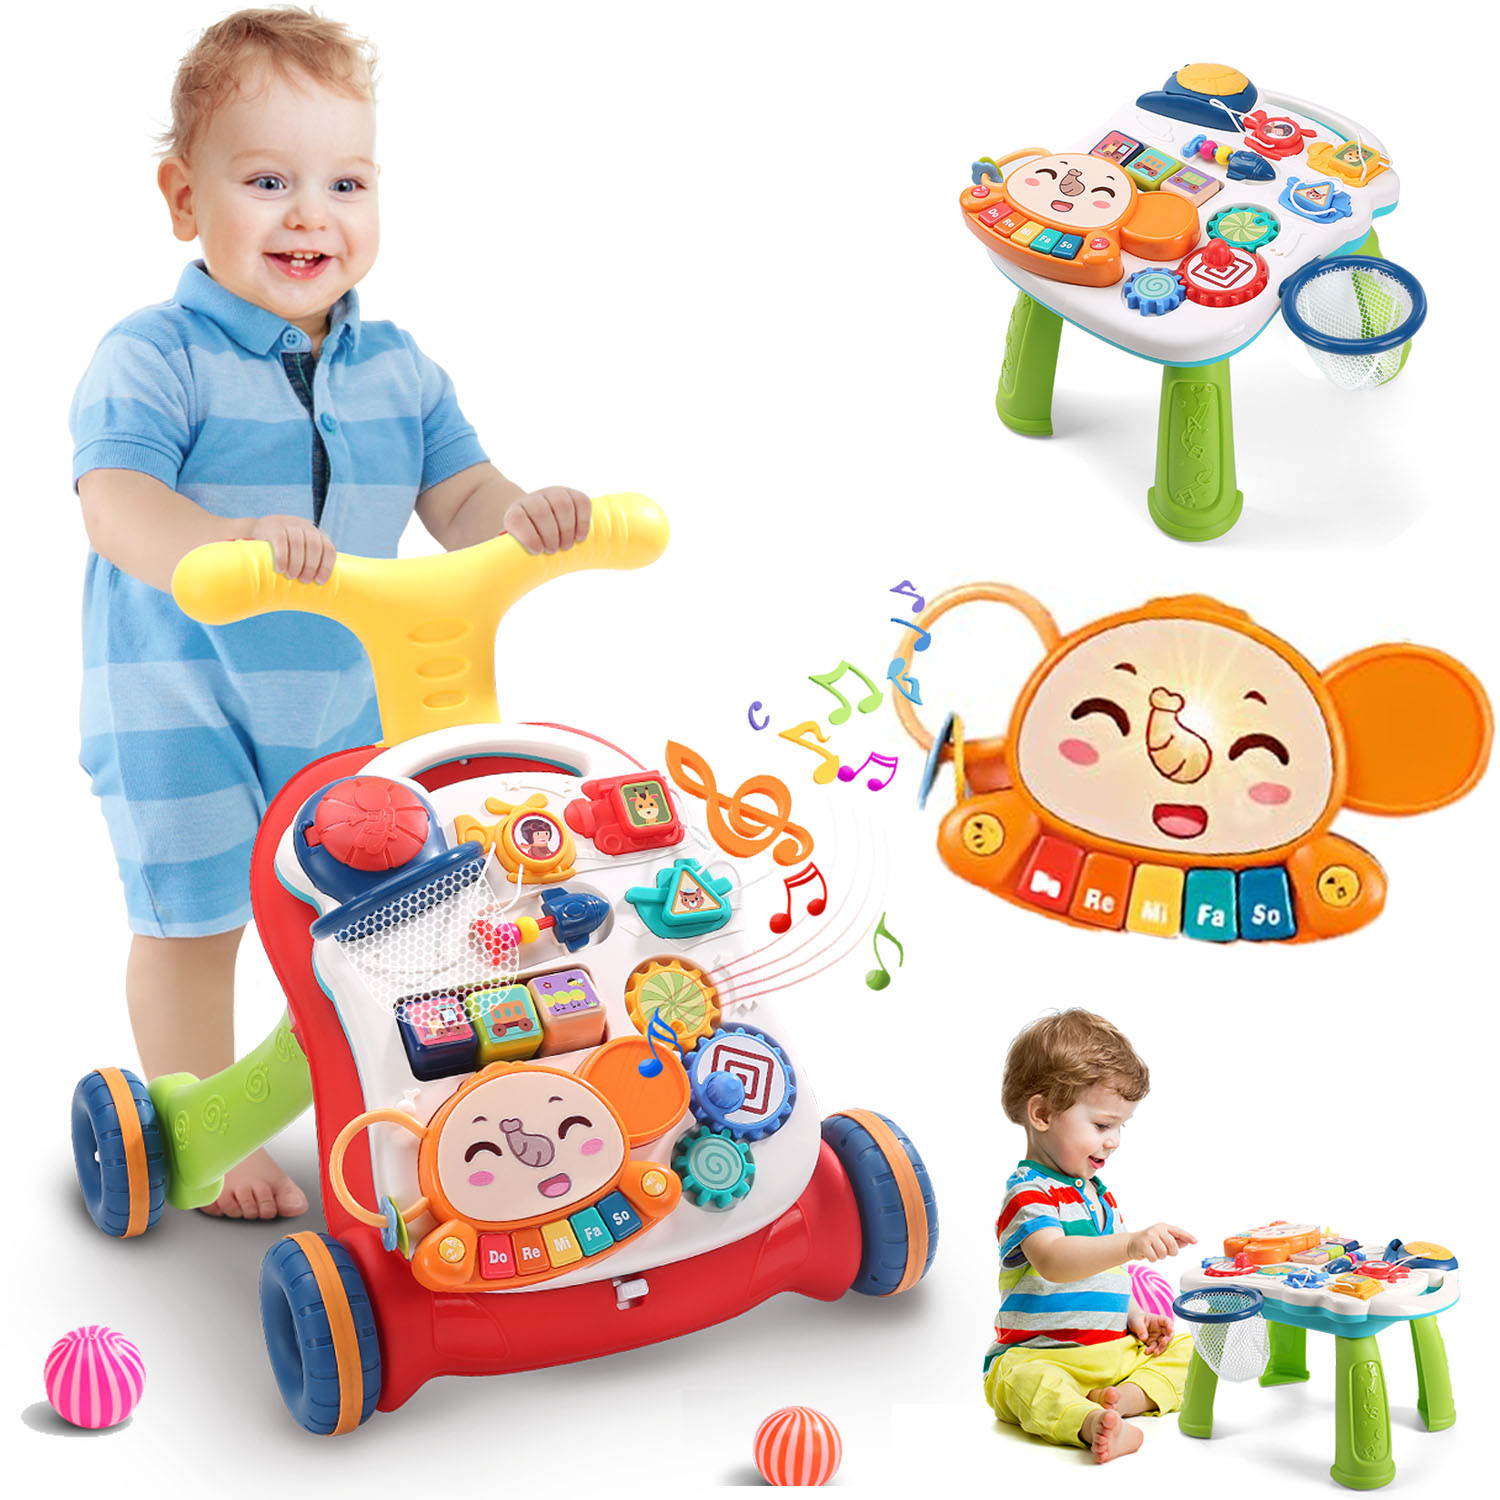 JoyStone 2-in-1 Baby Walker Baby Sit-to-Stand Learning Walker Kids Educational Toy Gift for Toddlers Infant Boys Girls - image 1 of 11